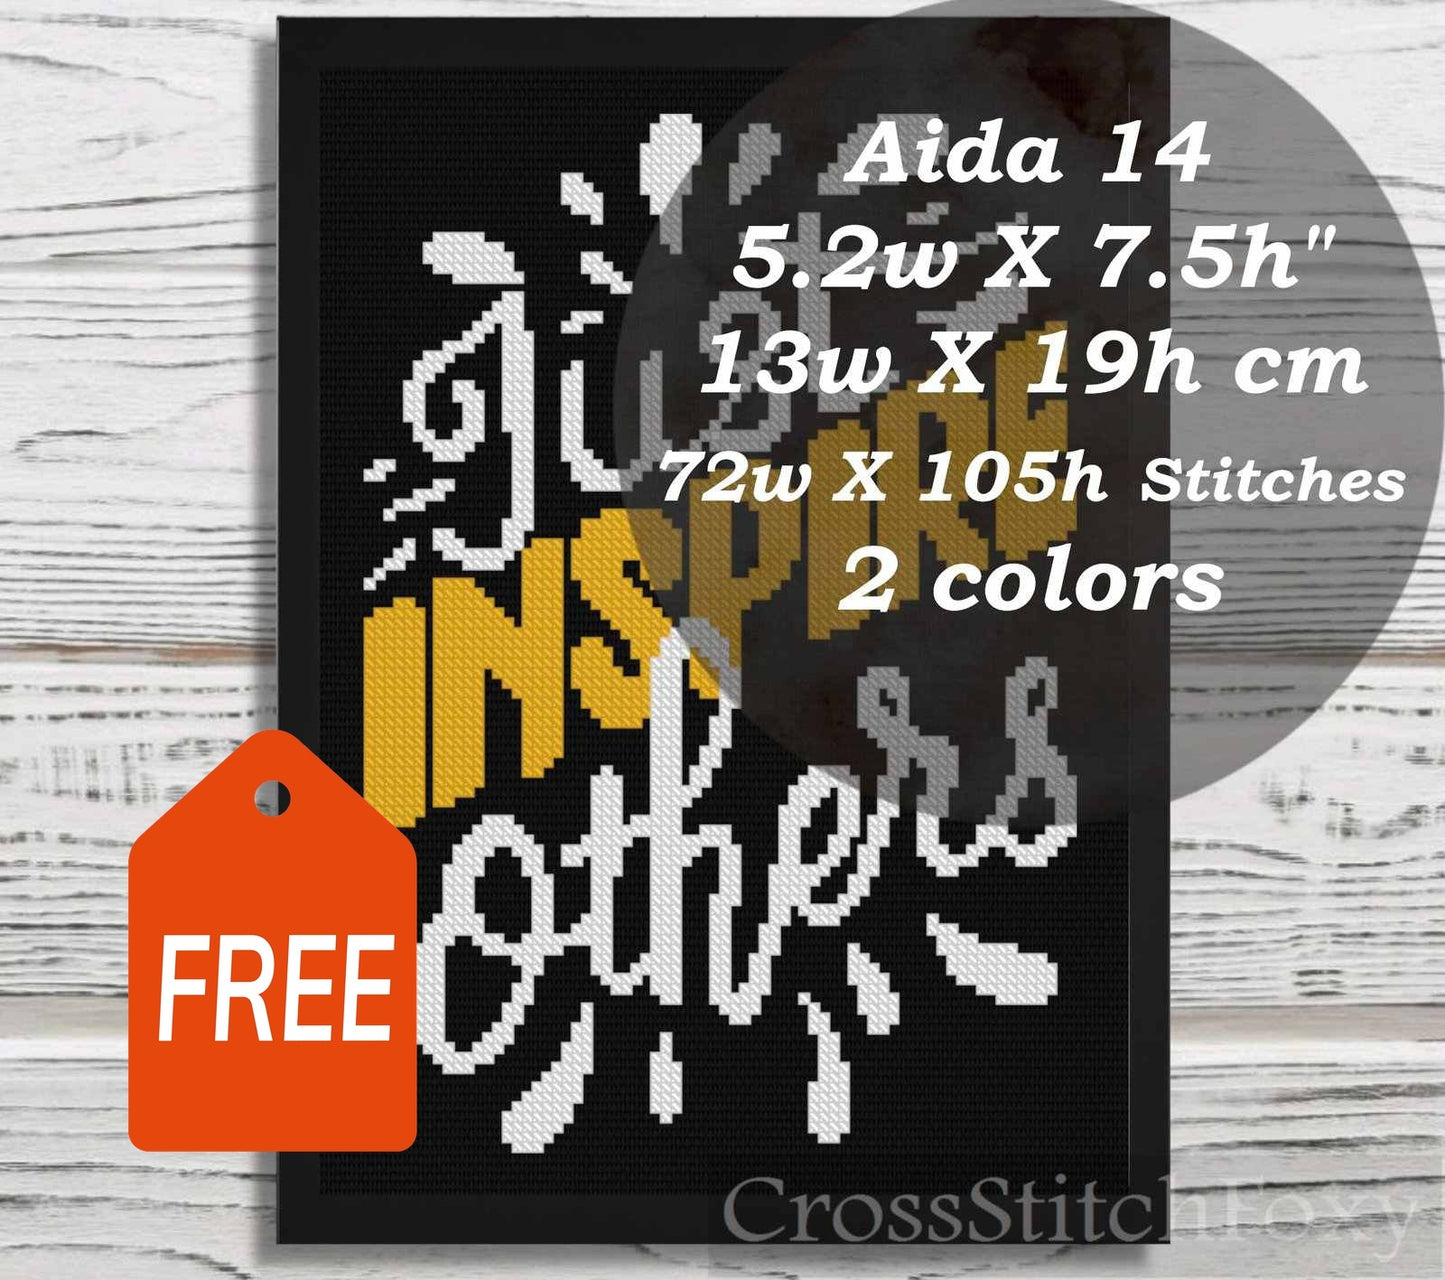 Just Inspire Others cross stitch pattern FREE